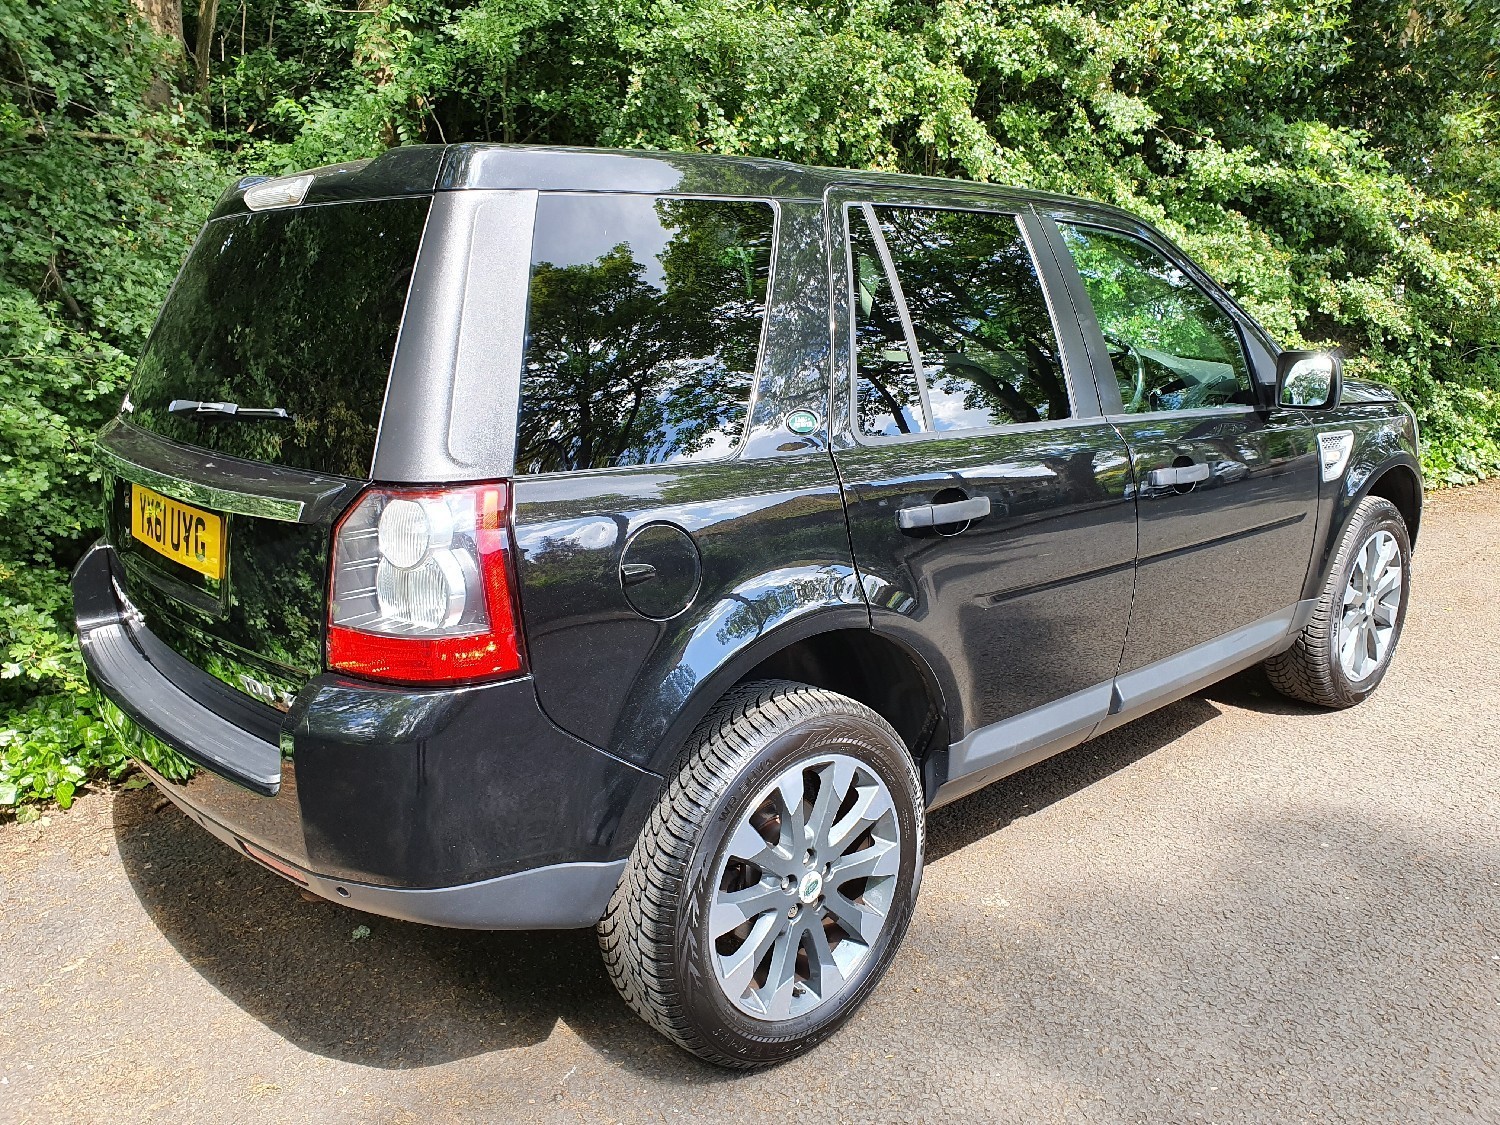 Used LAND ROVER FREELANDER in Keighley, West Yorkshire